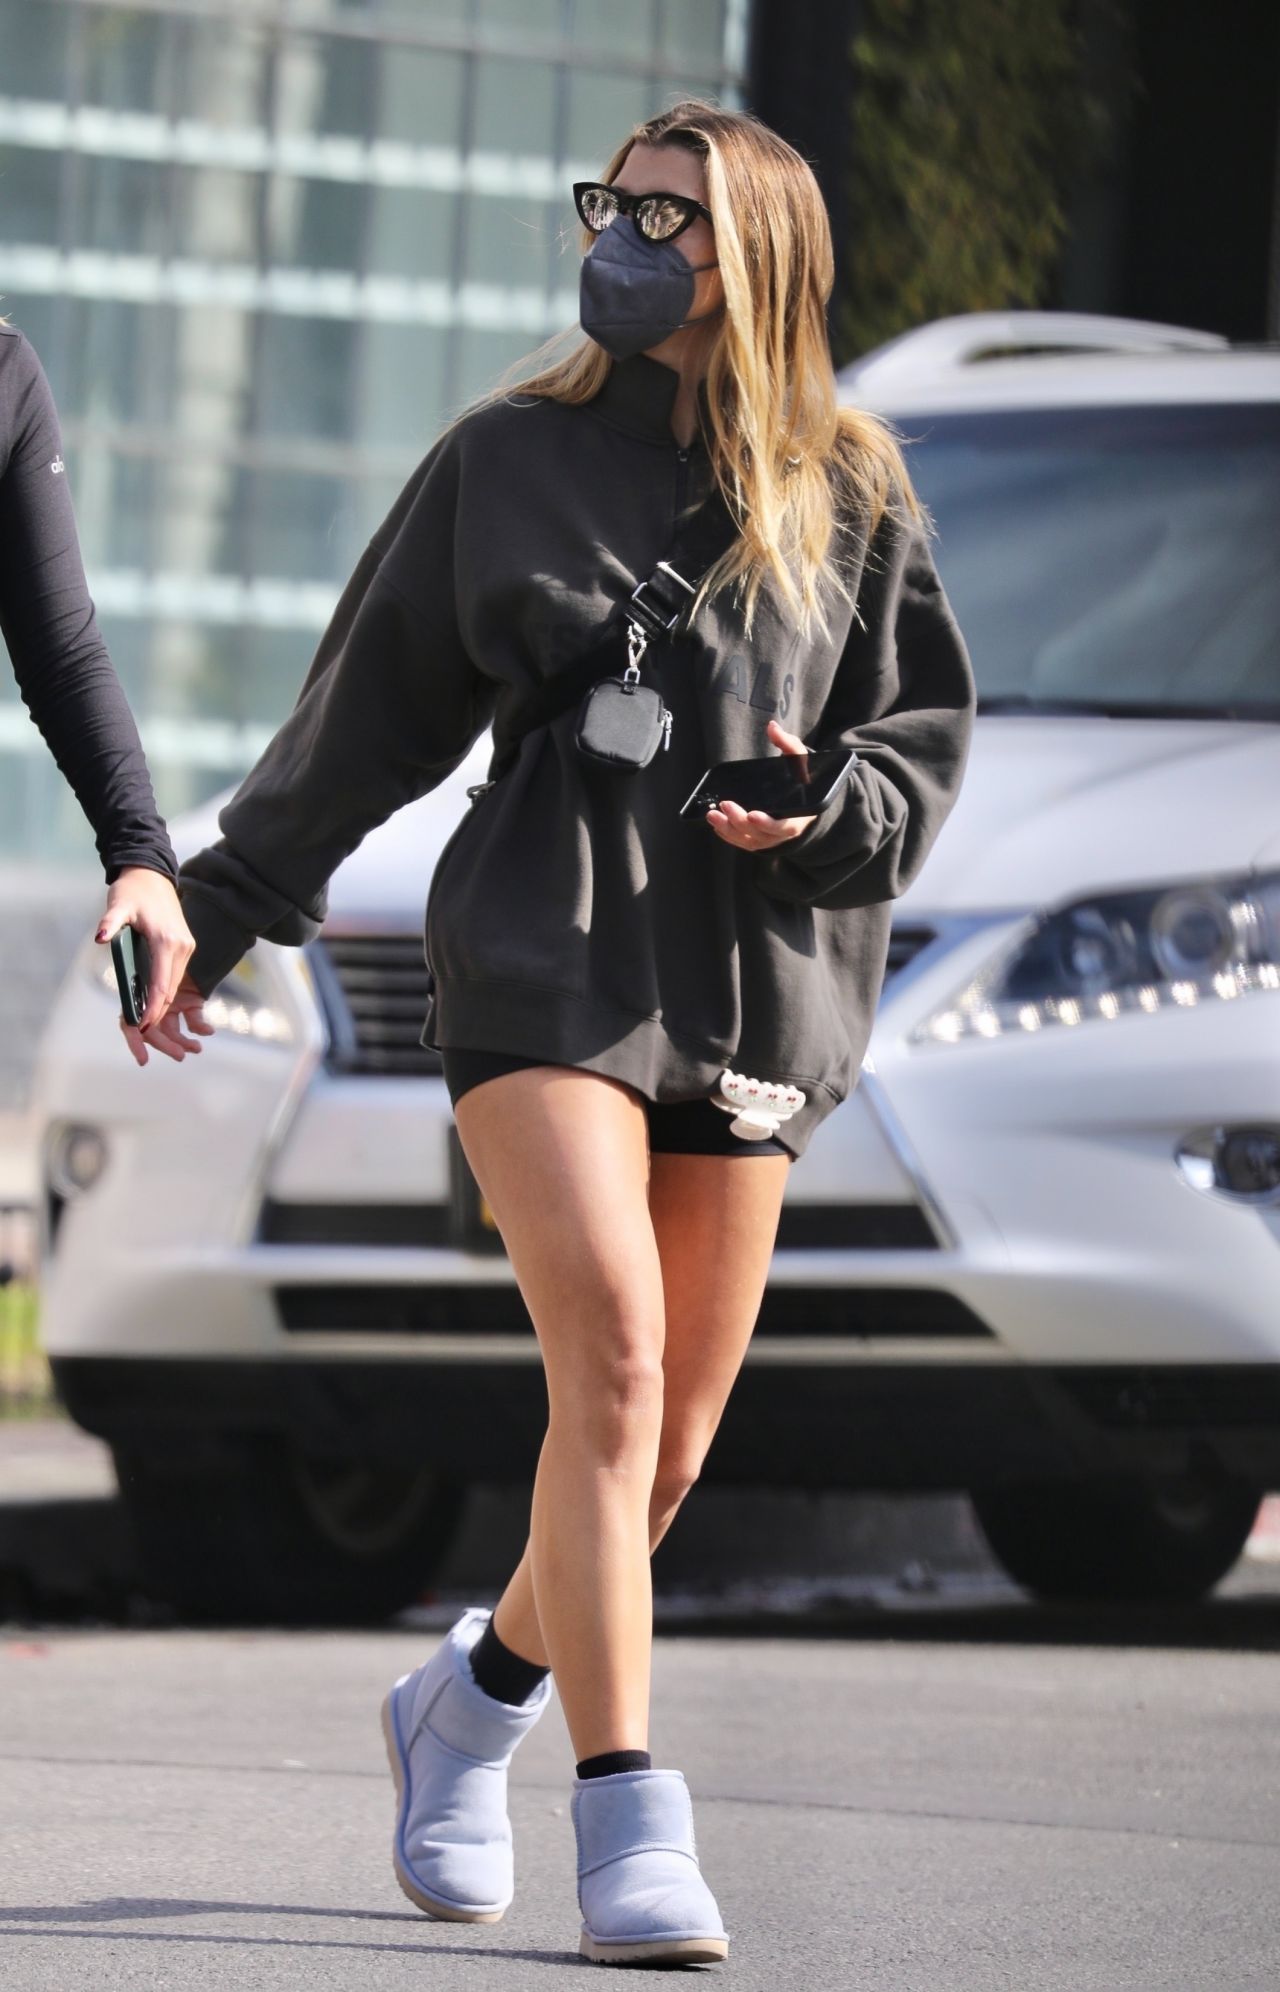 Sofia Richie West Hollywood April 10, 2018 – Star Style